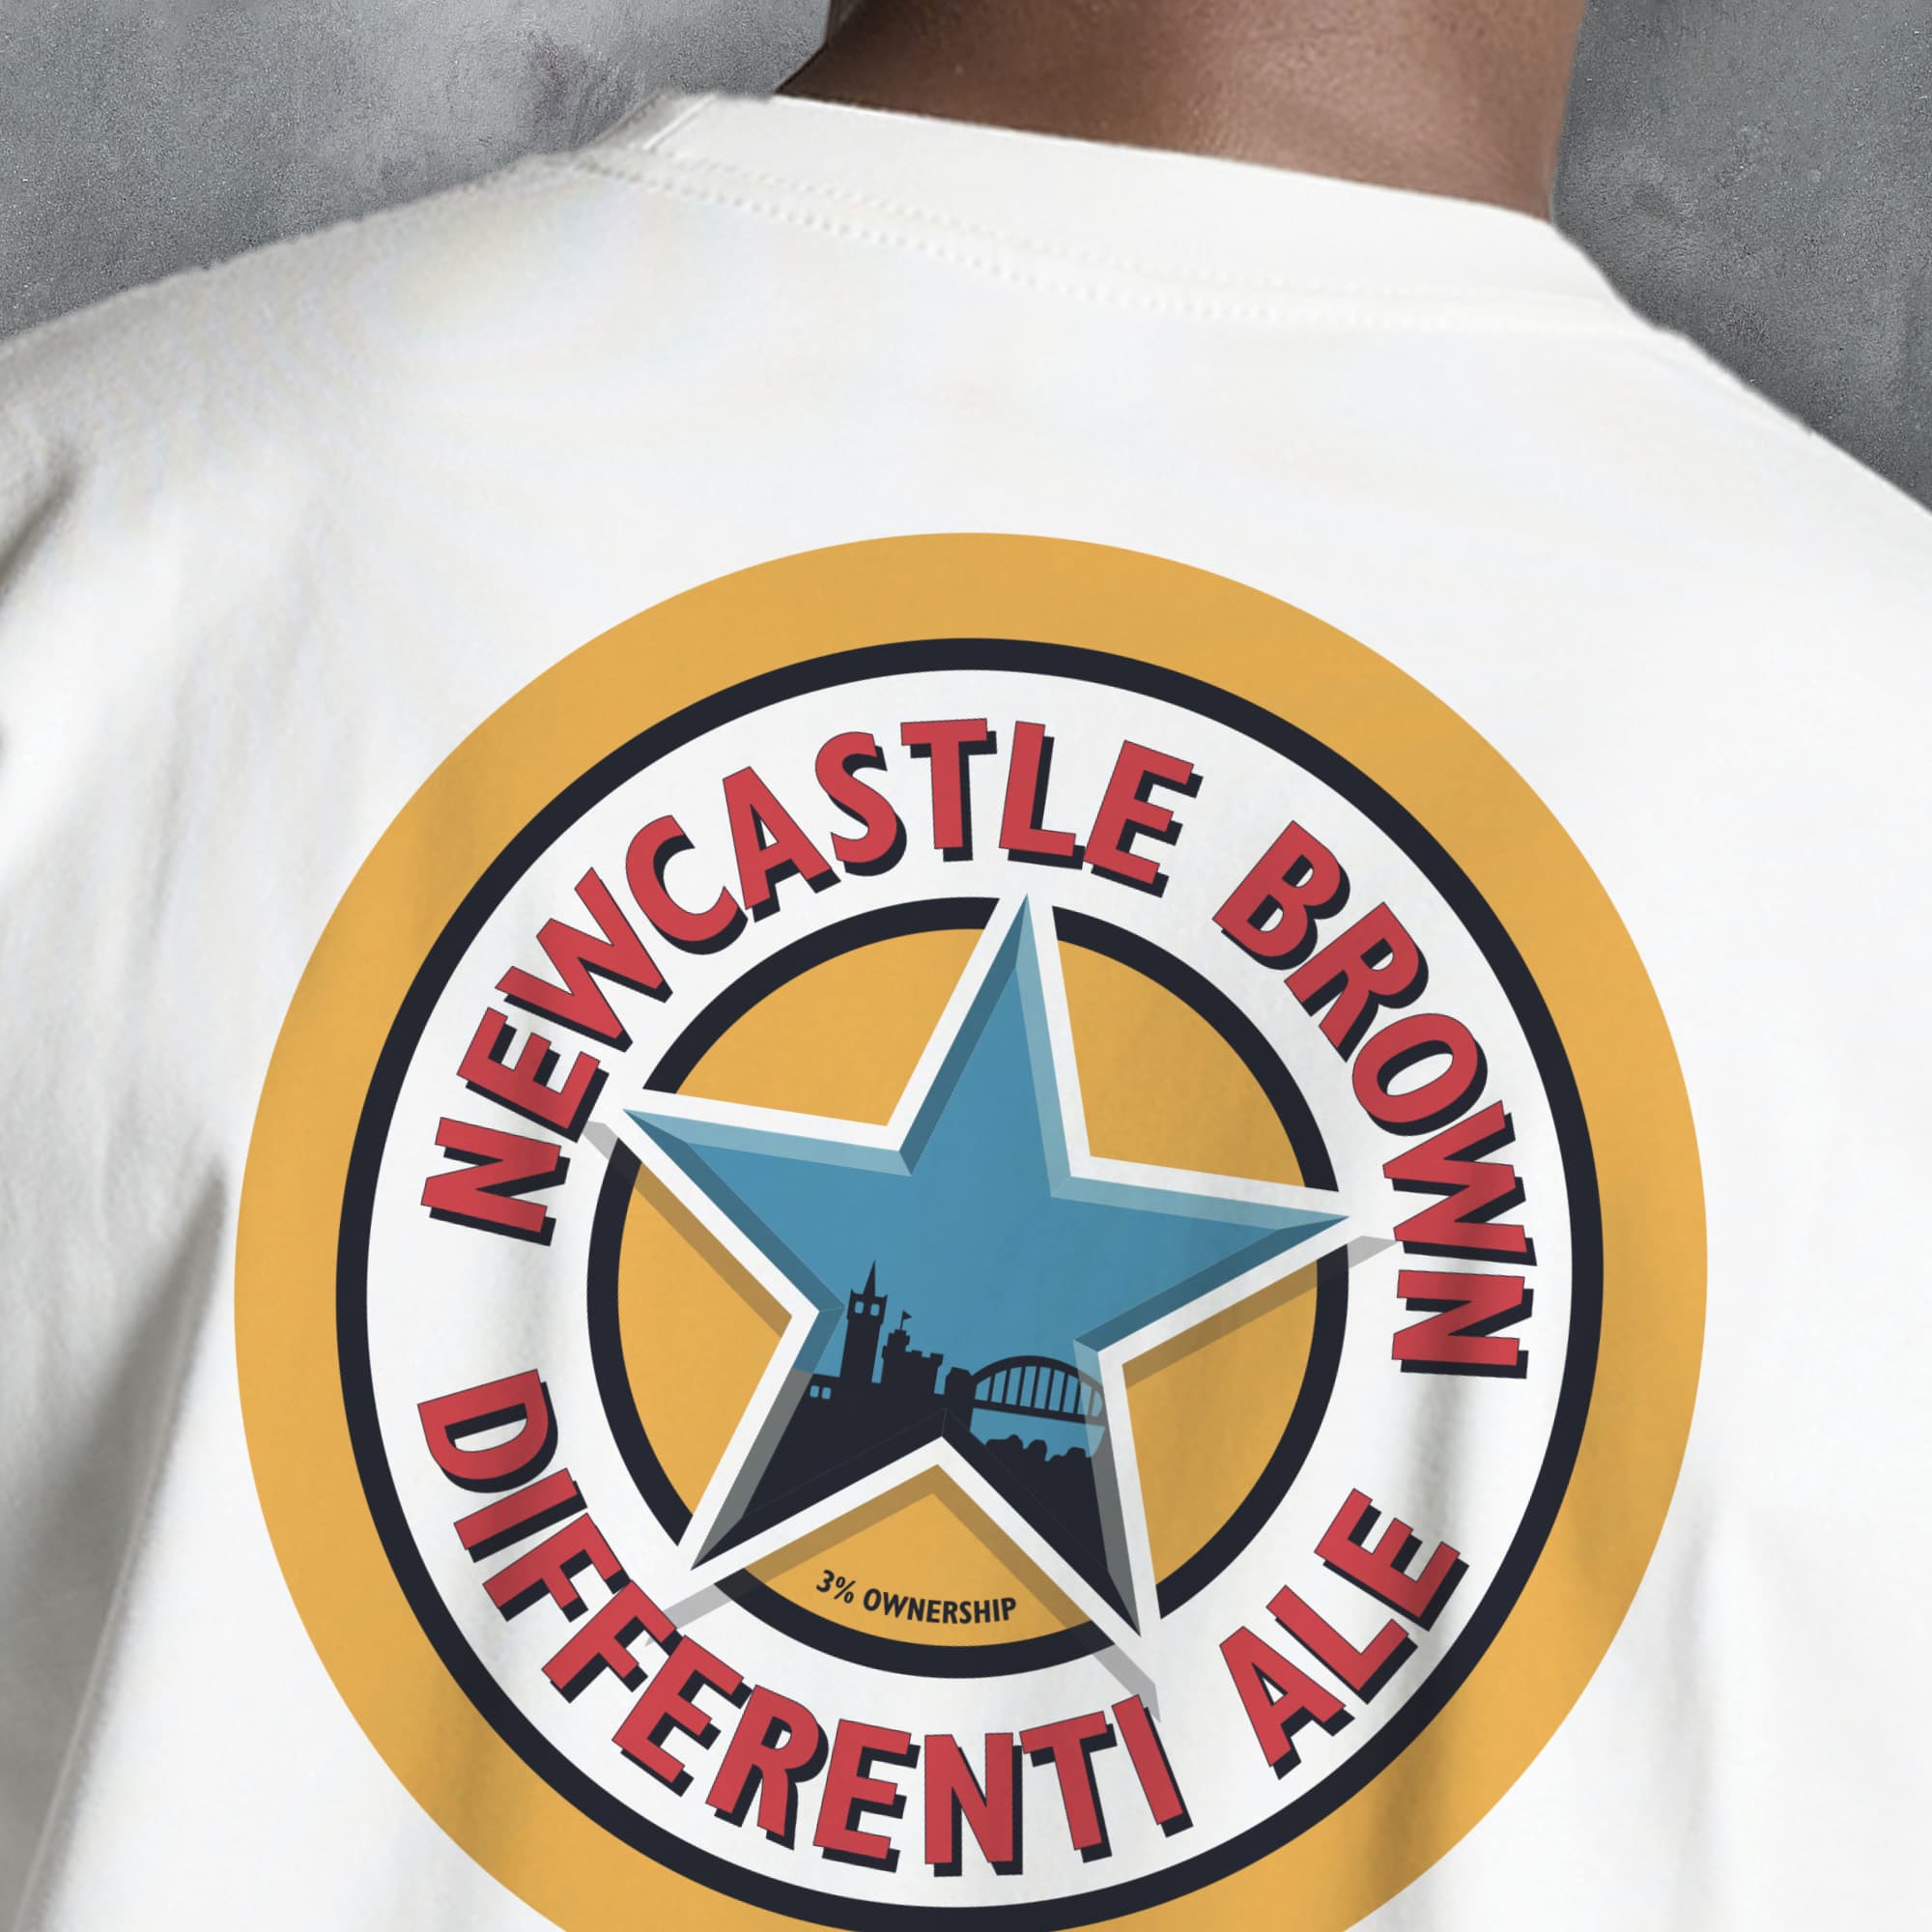 Fantasy League Football FPL 'Off The Bar' Newcastle Brown Differentiale T-Shirt